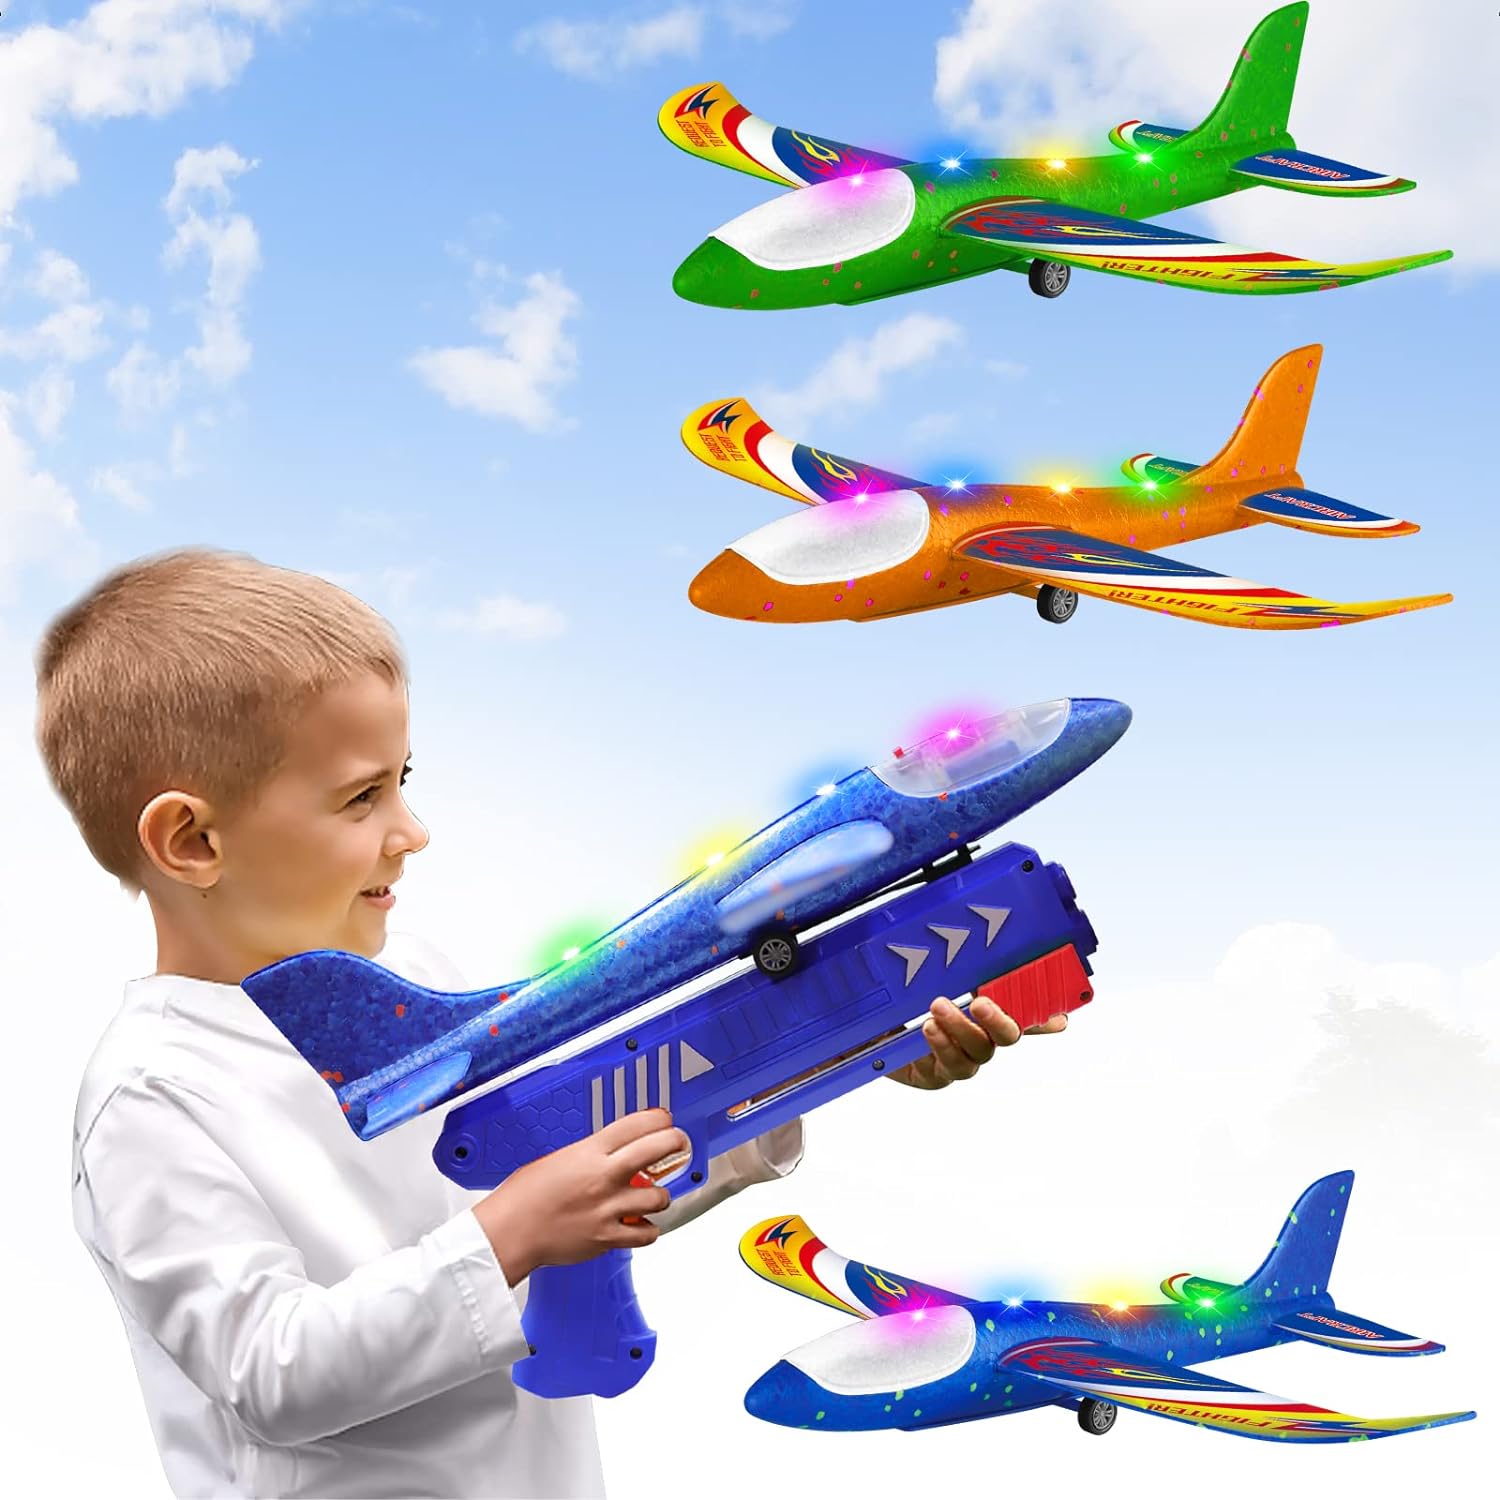 You are currently viewing Wesfuner Foam Airplane Launcher Toy Review